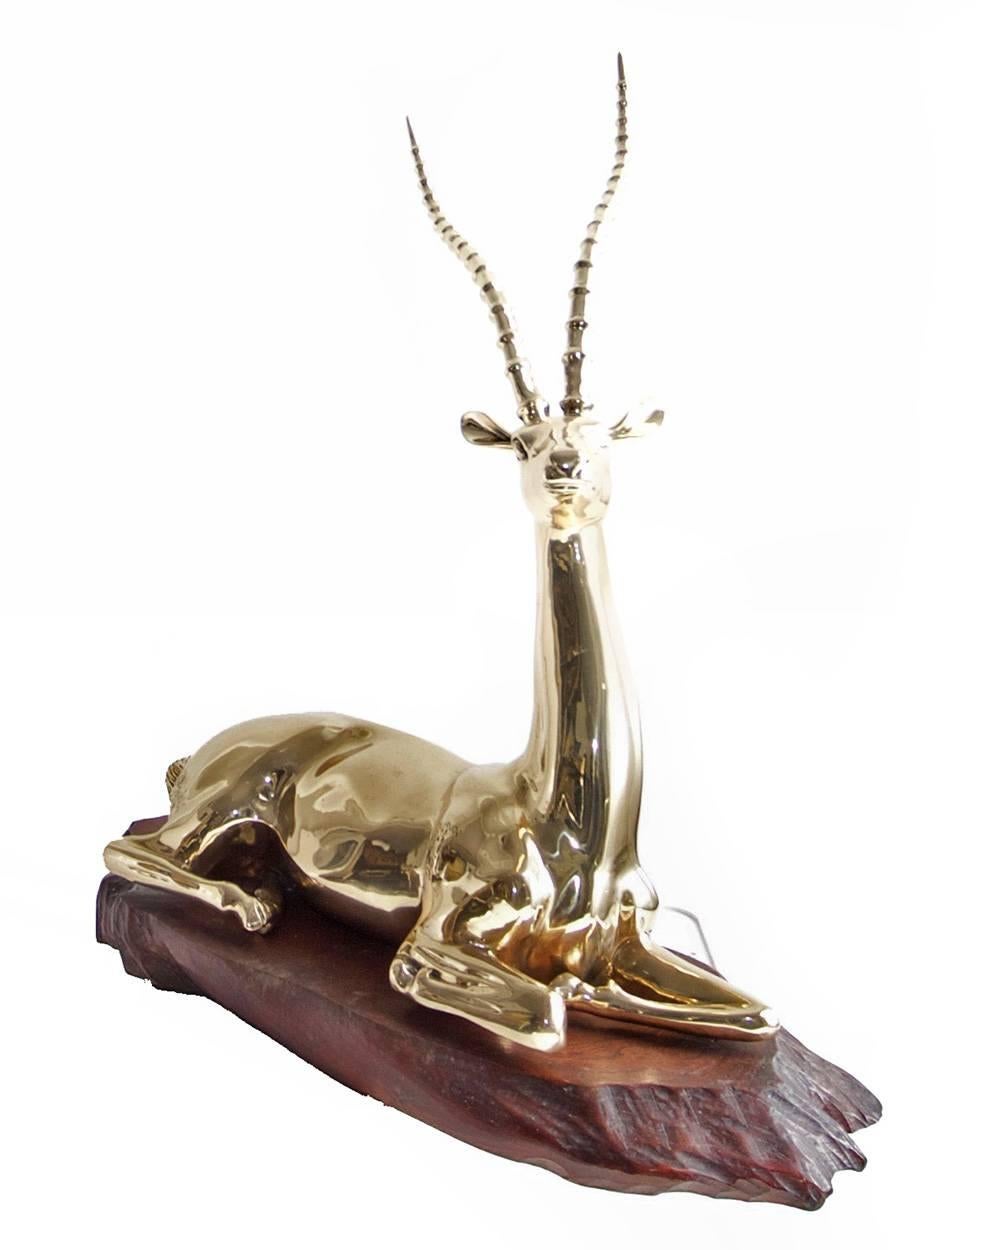 Cast Restored Mid-20th Century Brass Sculpture of Impala on Natural Edge Wood Bas For Sale